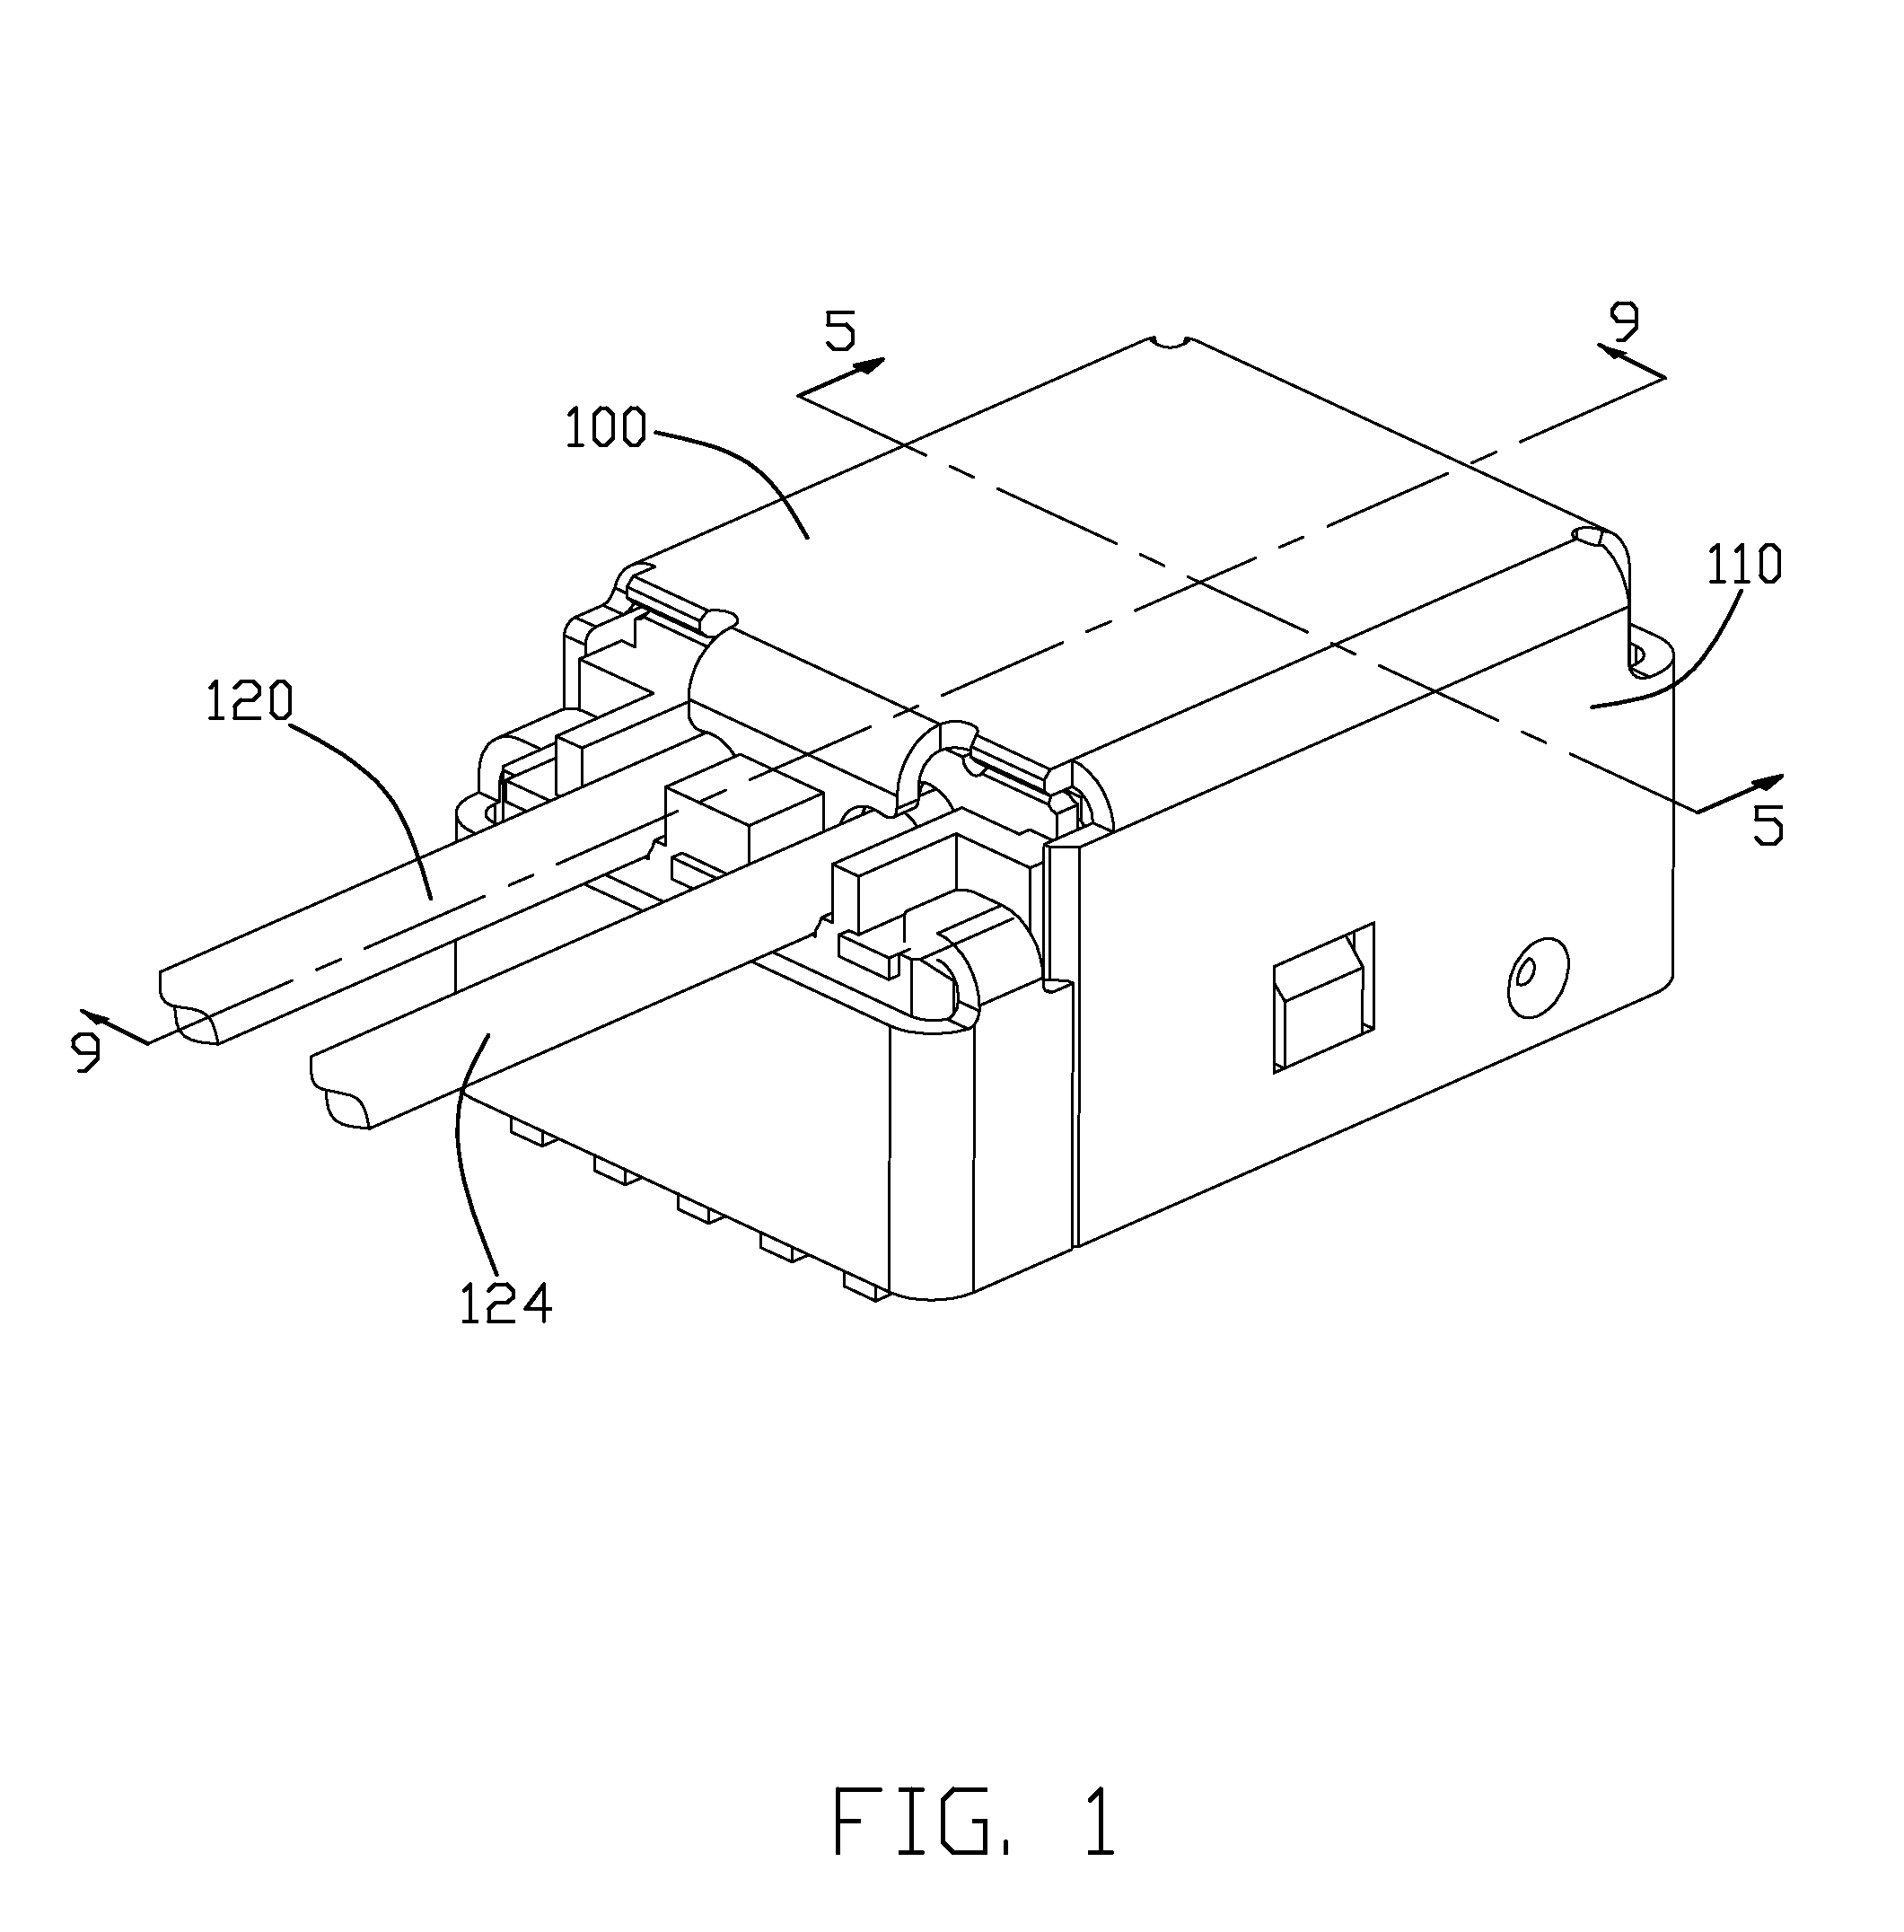 Cable assembly having shroud substantially covering mated receptacle connector